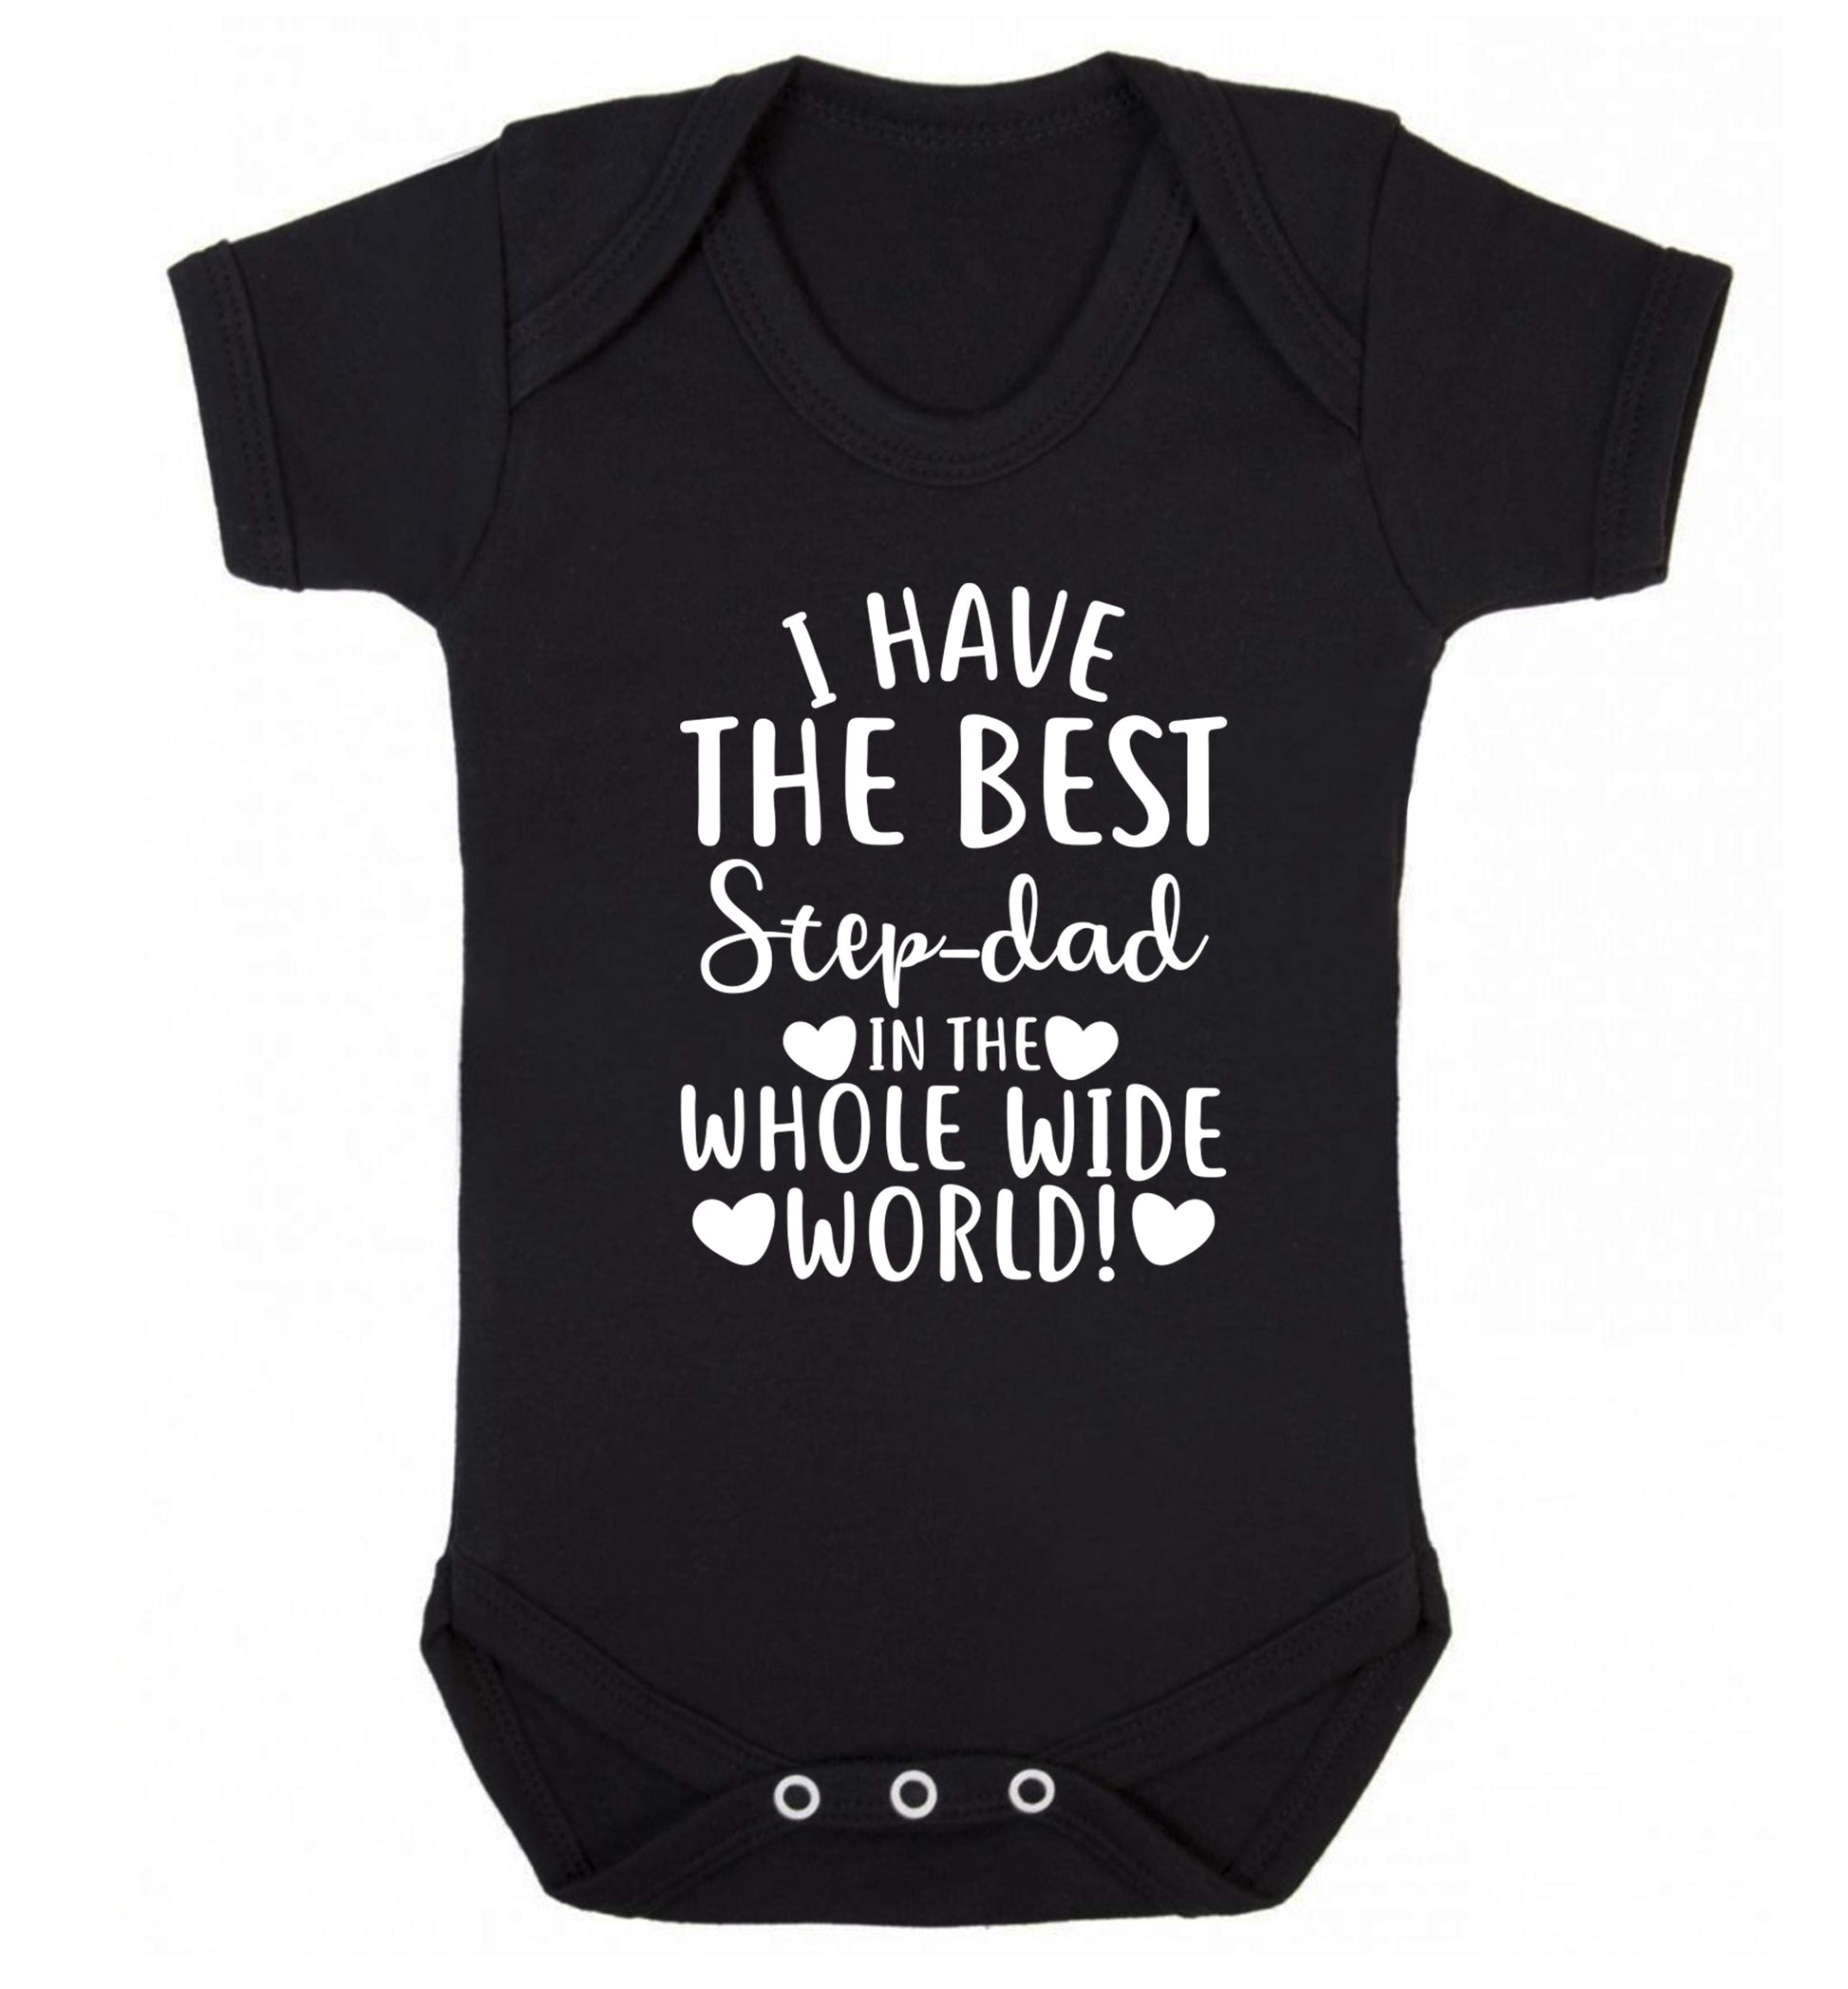 I have the best step-dad in the whole wide world! Baby Vest black 18-24 months